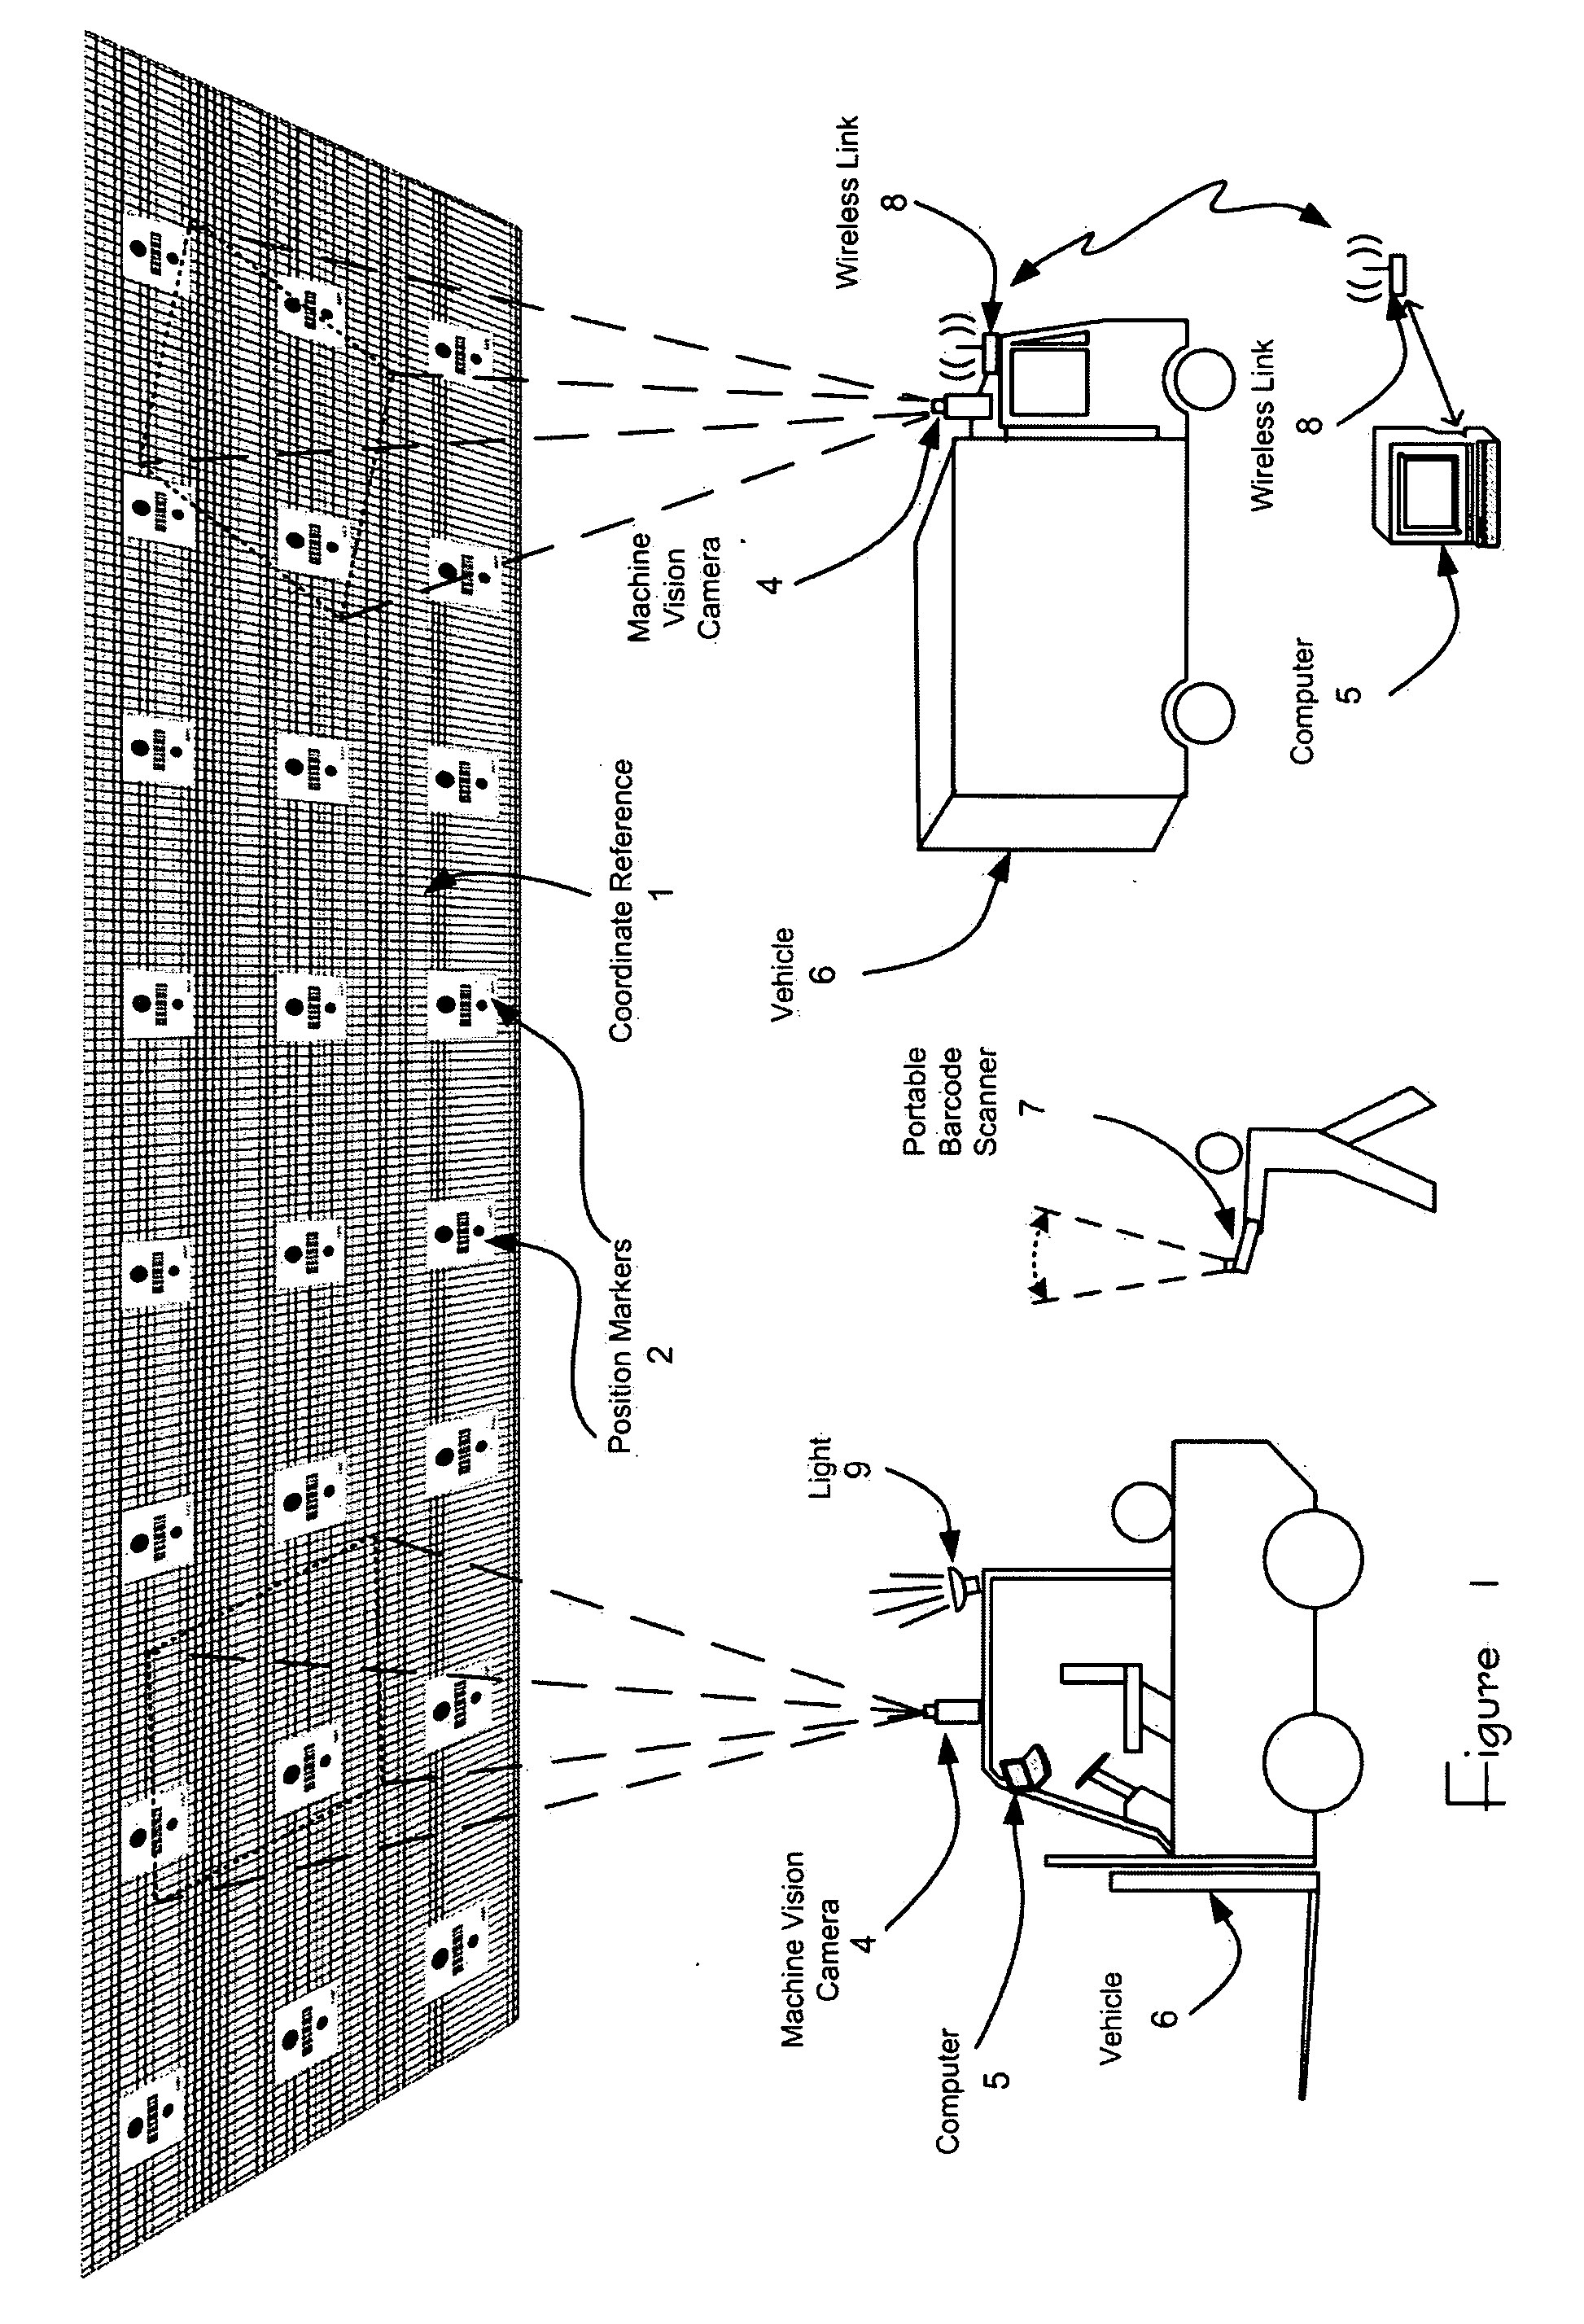 Method and apparatus for determining position and rotational orientation of an object